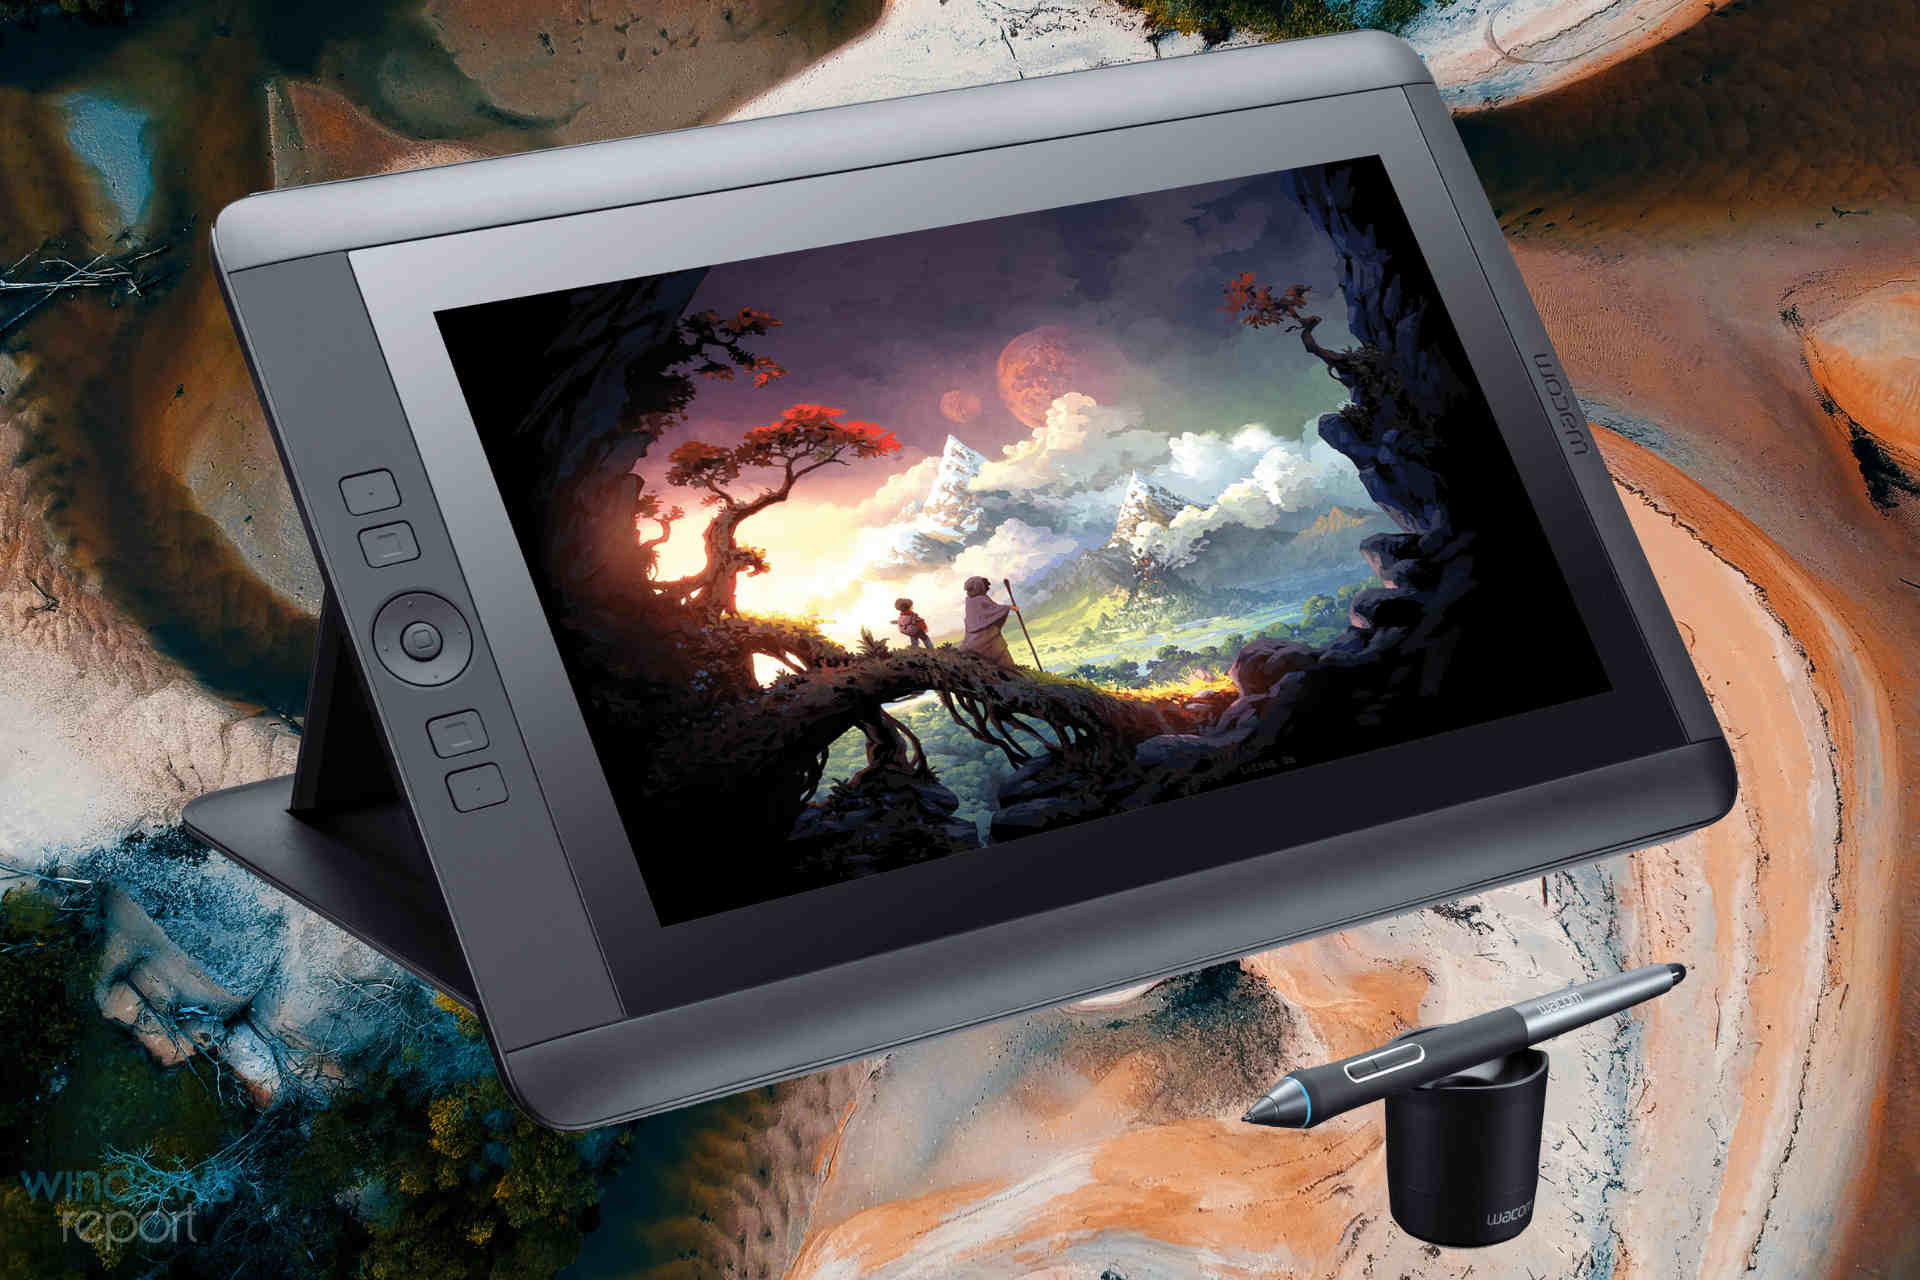 what is the best drawing software for wacom tablets